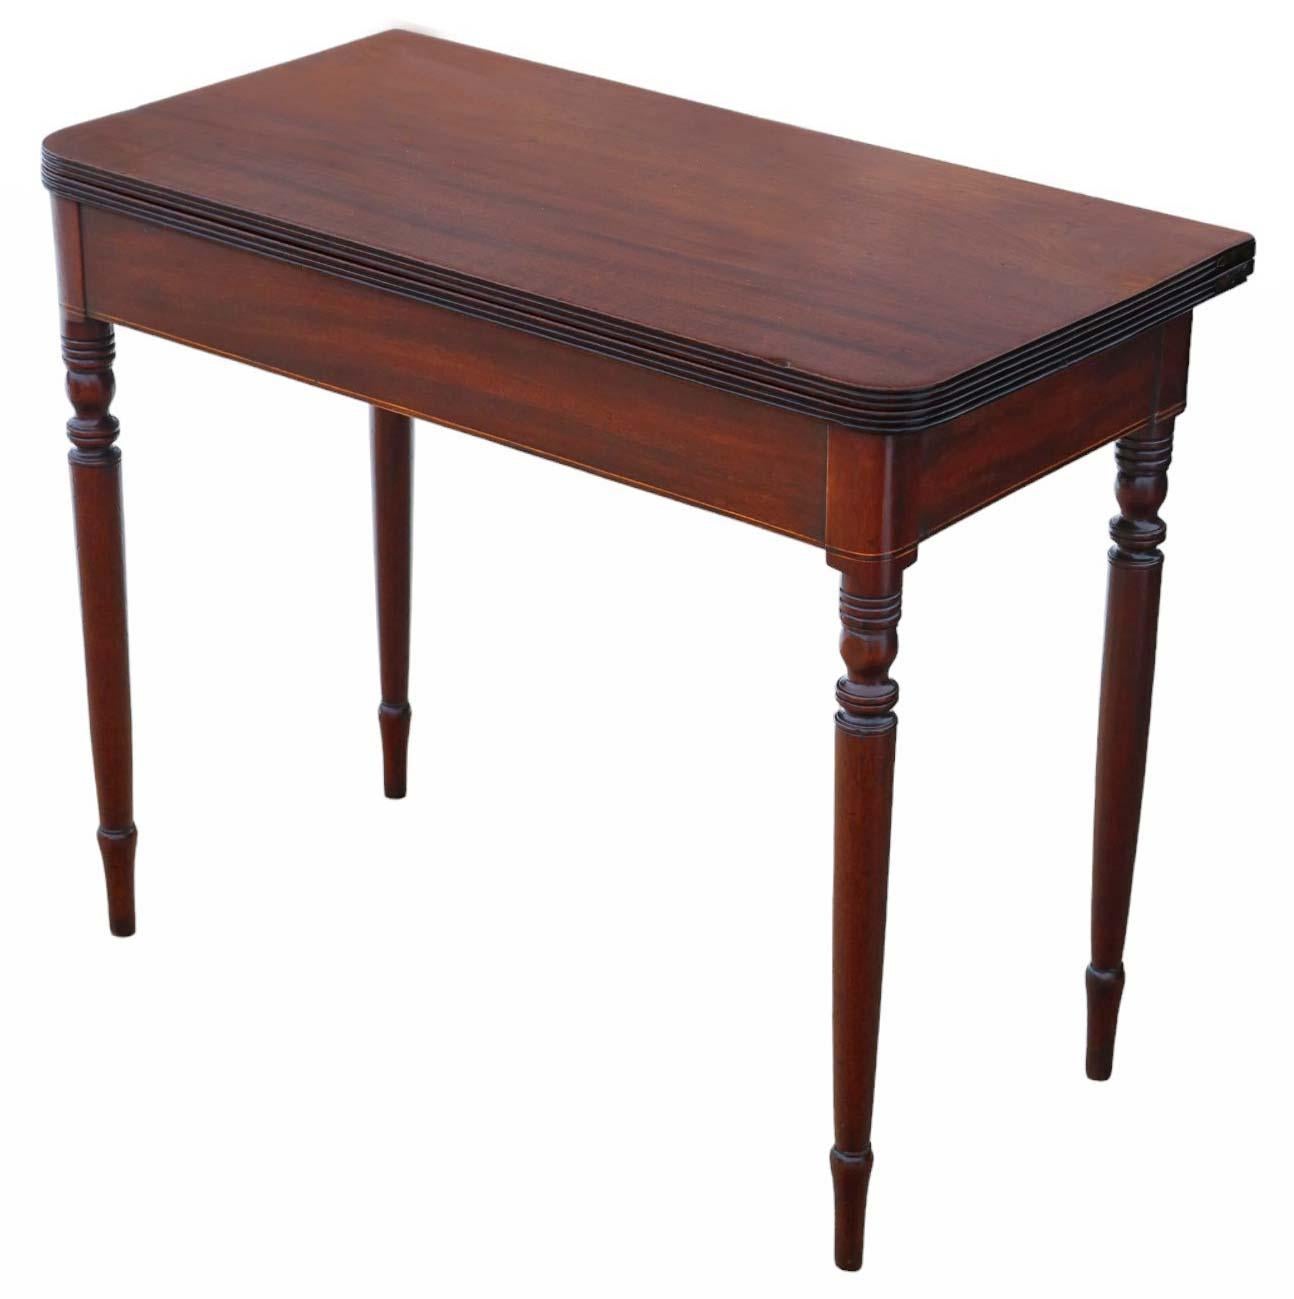 Antique Fine Quality C1800 Inlaid Mahogany Folding Card or Tea Table - Side In Good Condition For Sale In Wisbech, Cambridgeshire